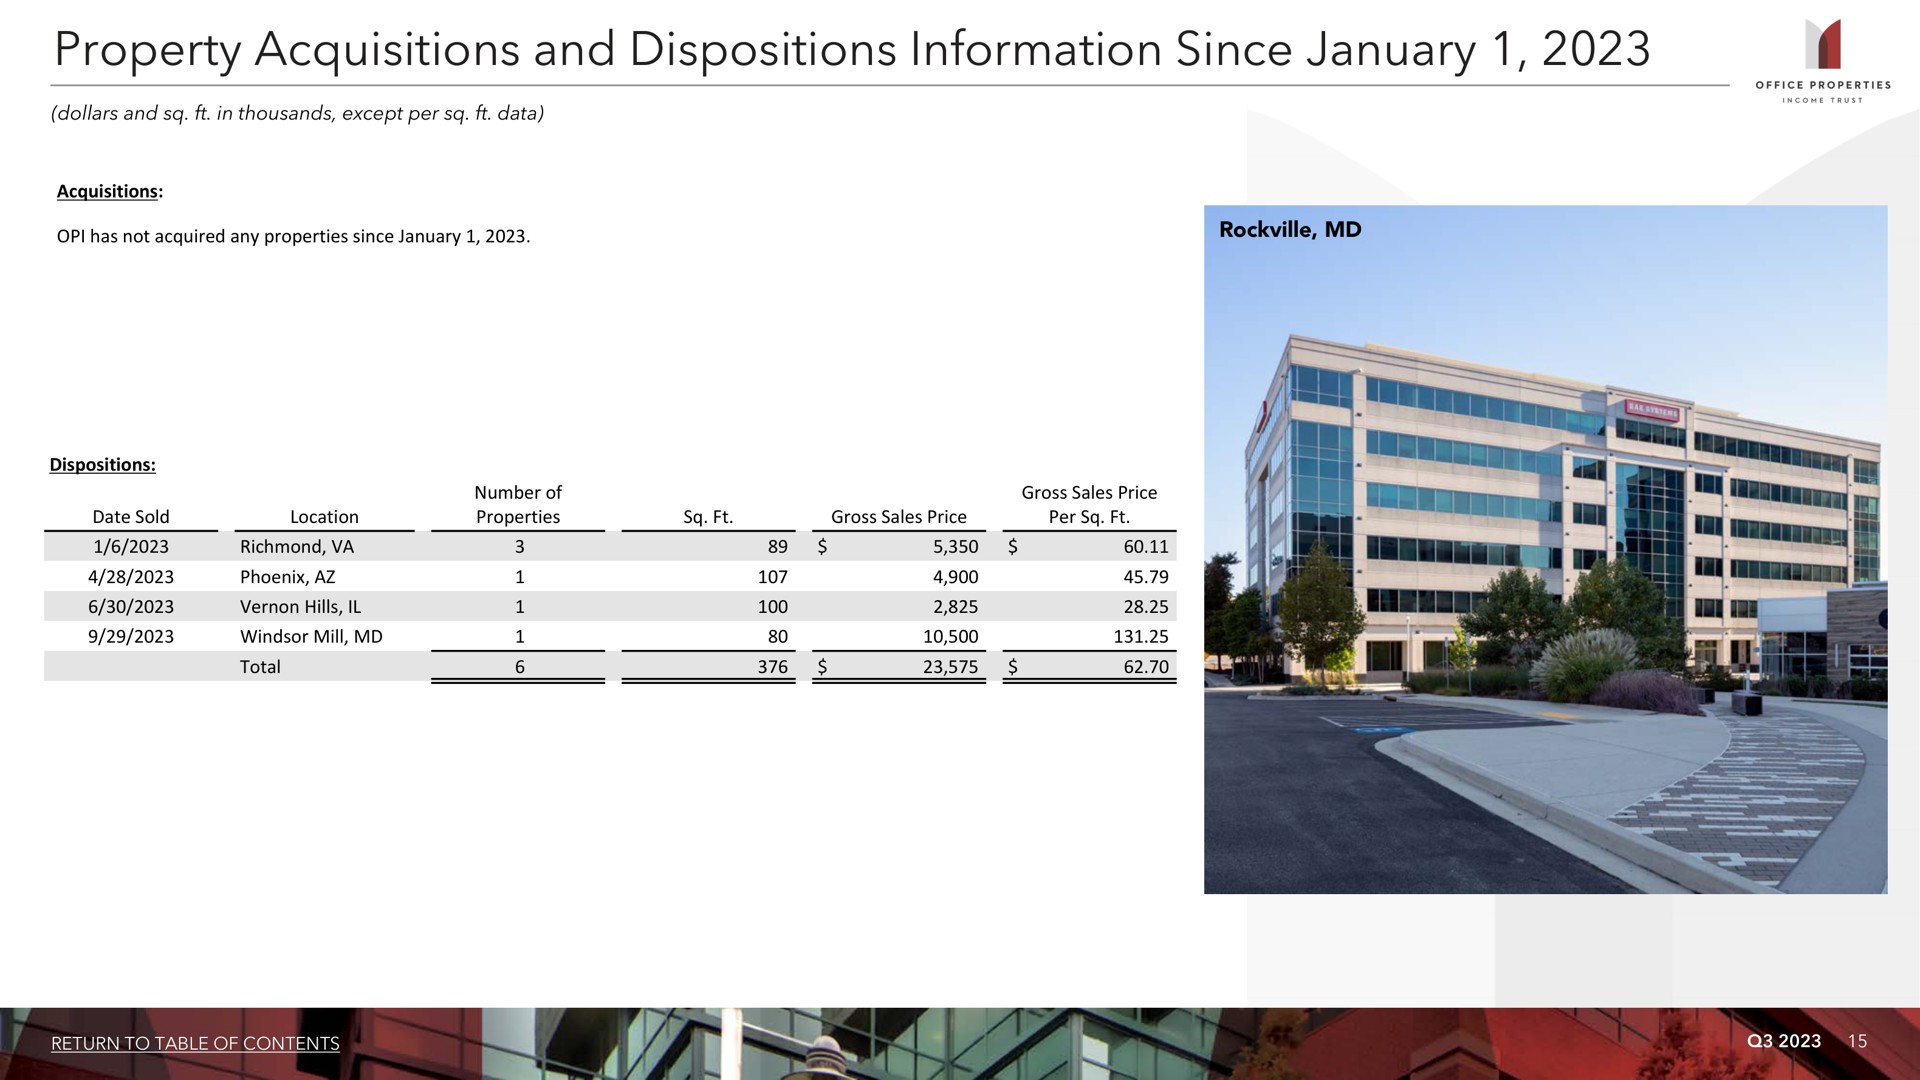 property acquisitions and dispositions information since i | Office Properties Income Trust